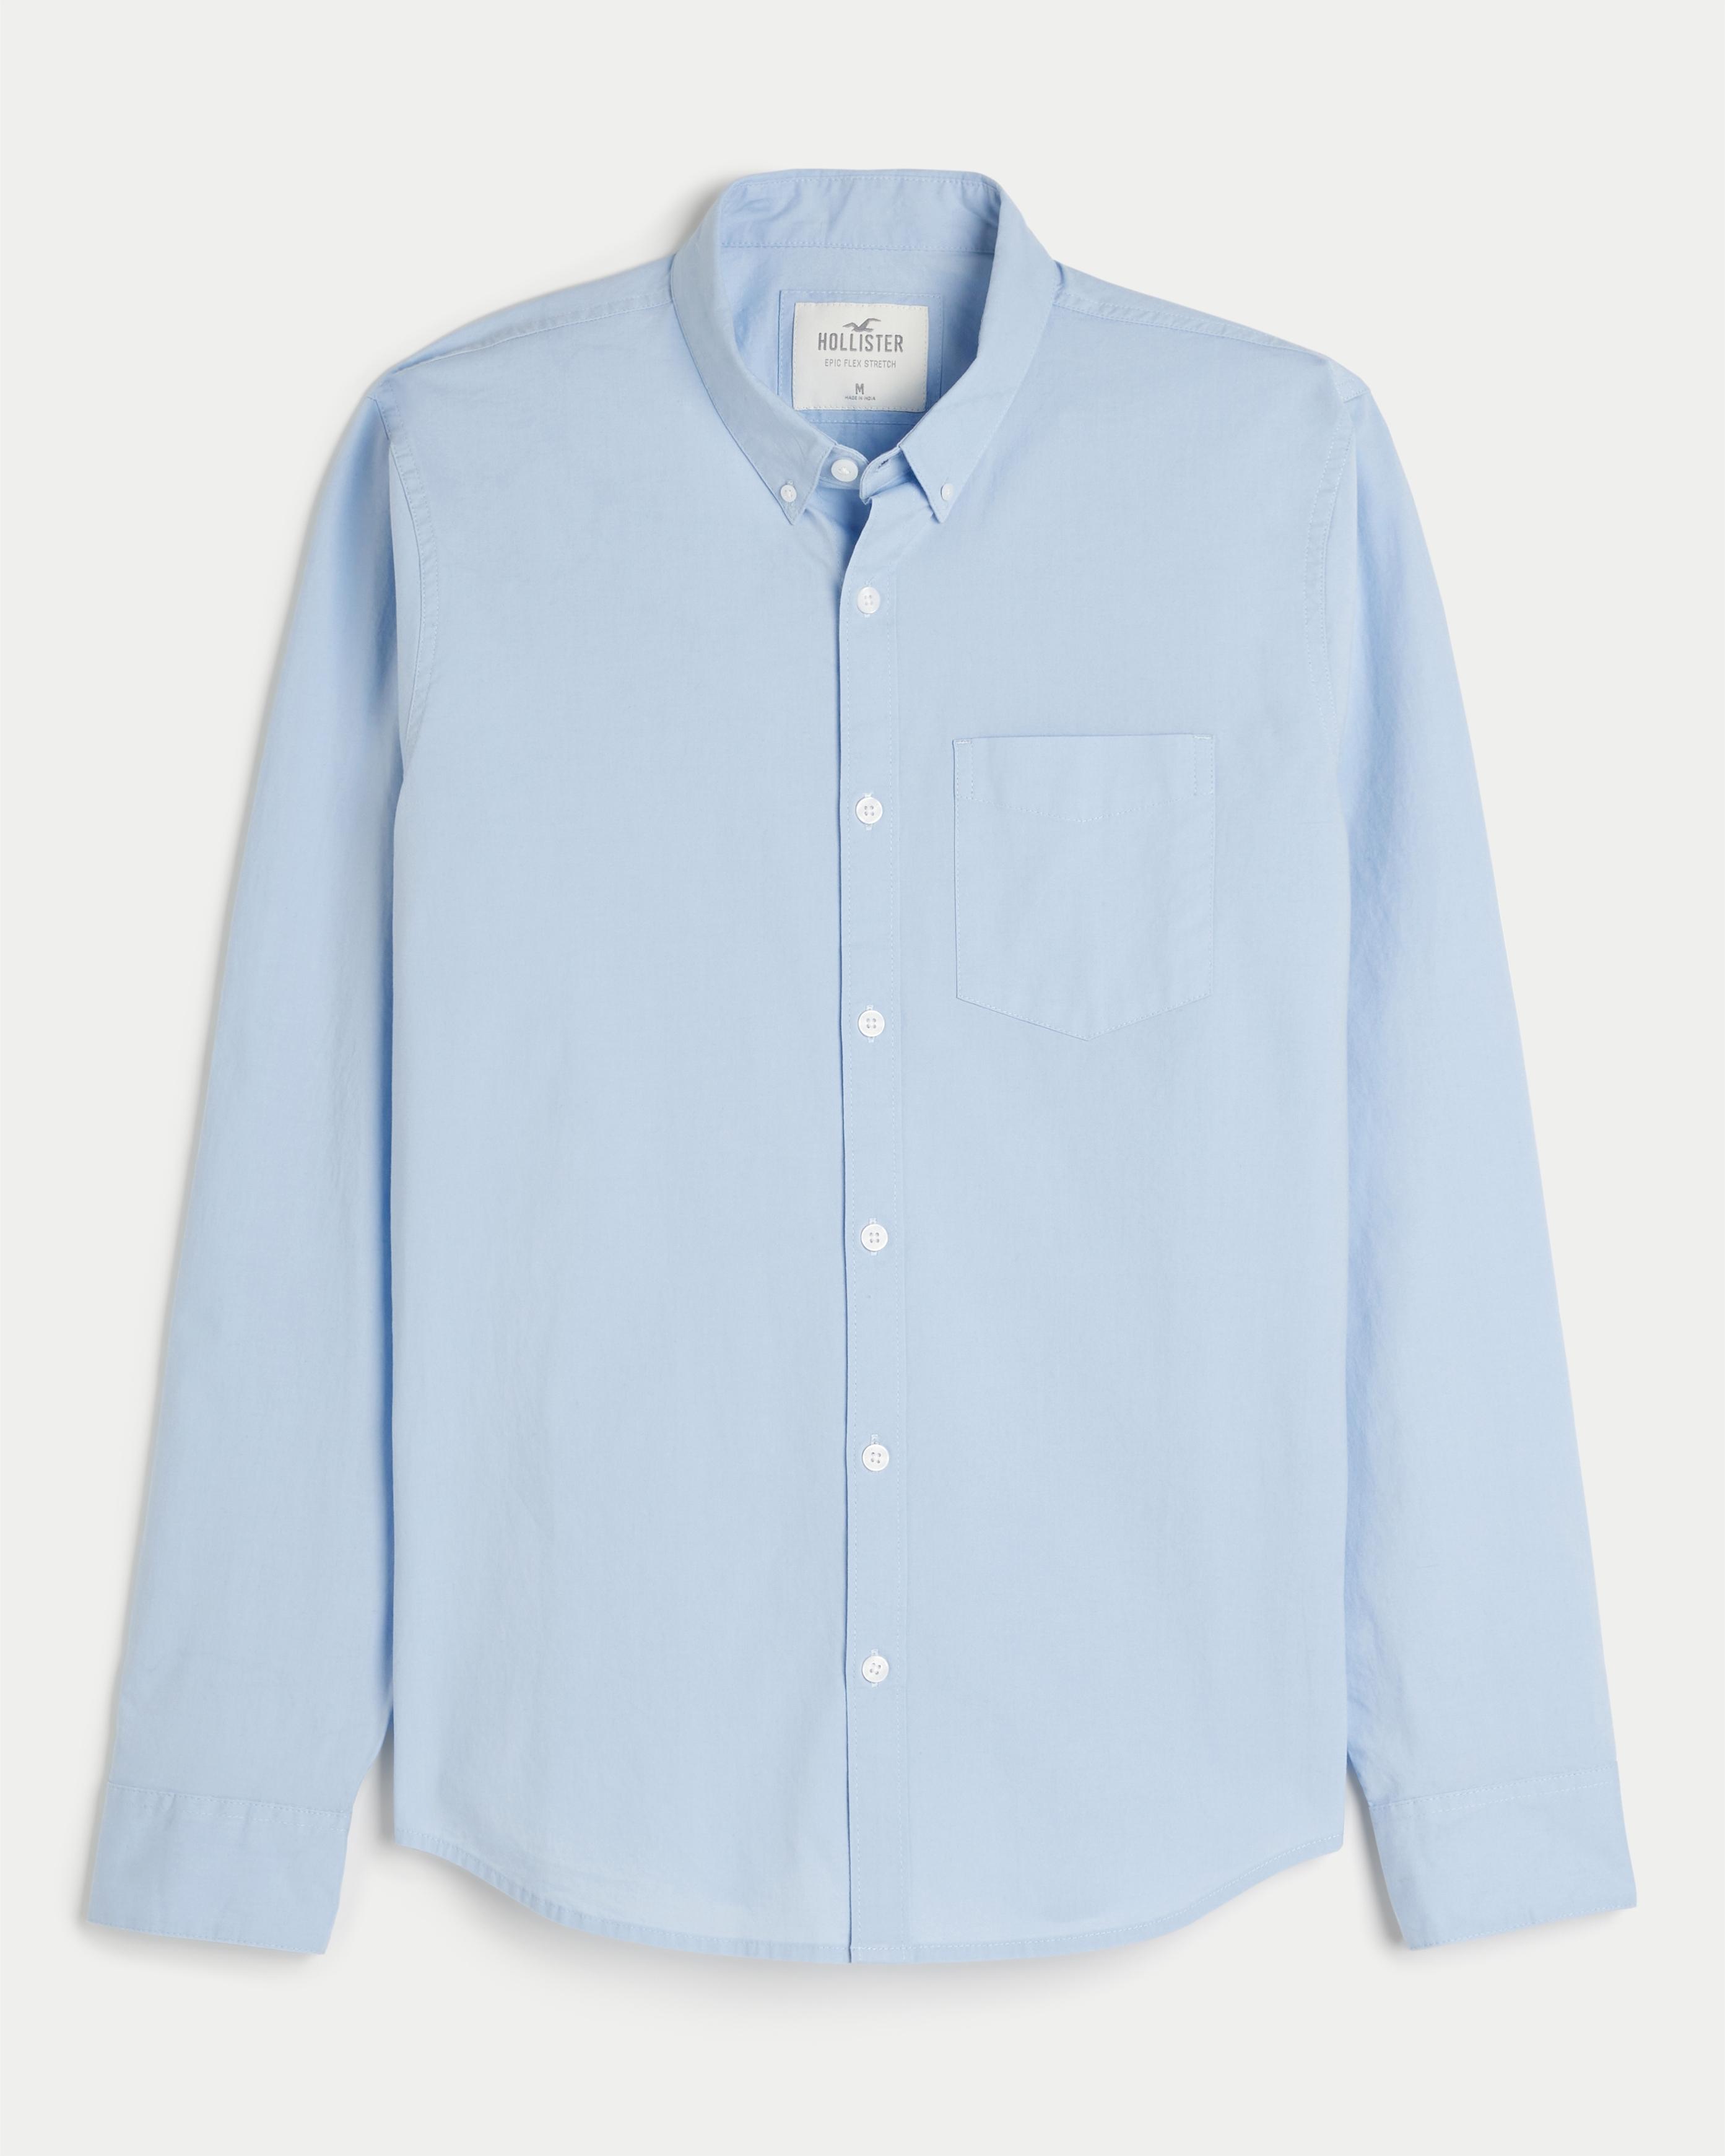 Hollister Stretch Oxford Shirt in Blue for Men